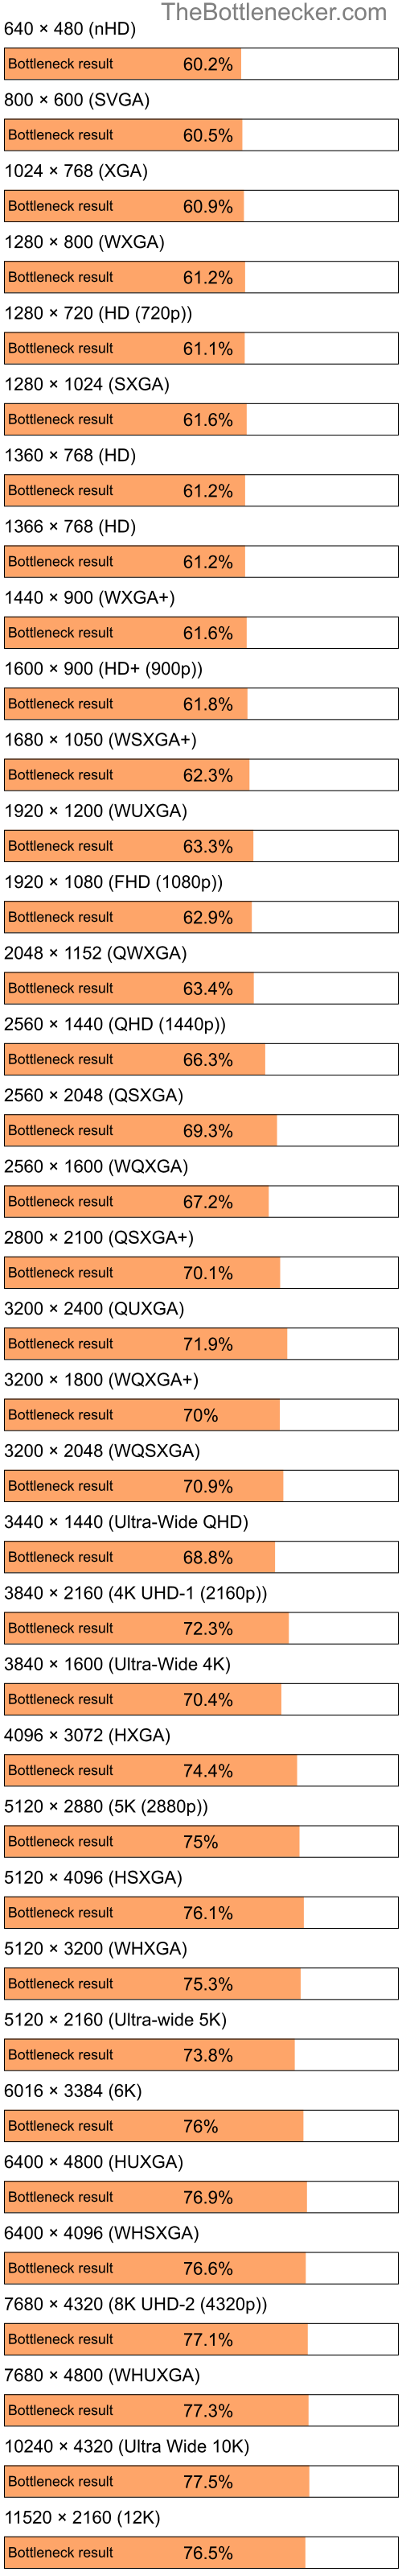 Bottleneck results by resolution for Intel Celeron and AMD Radeon X800 GTO in General Tasks